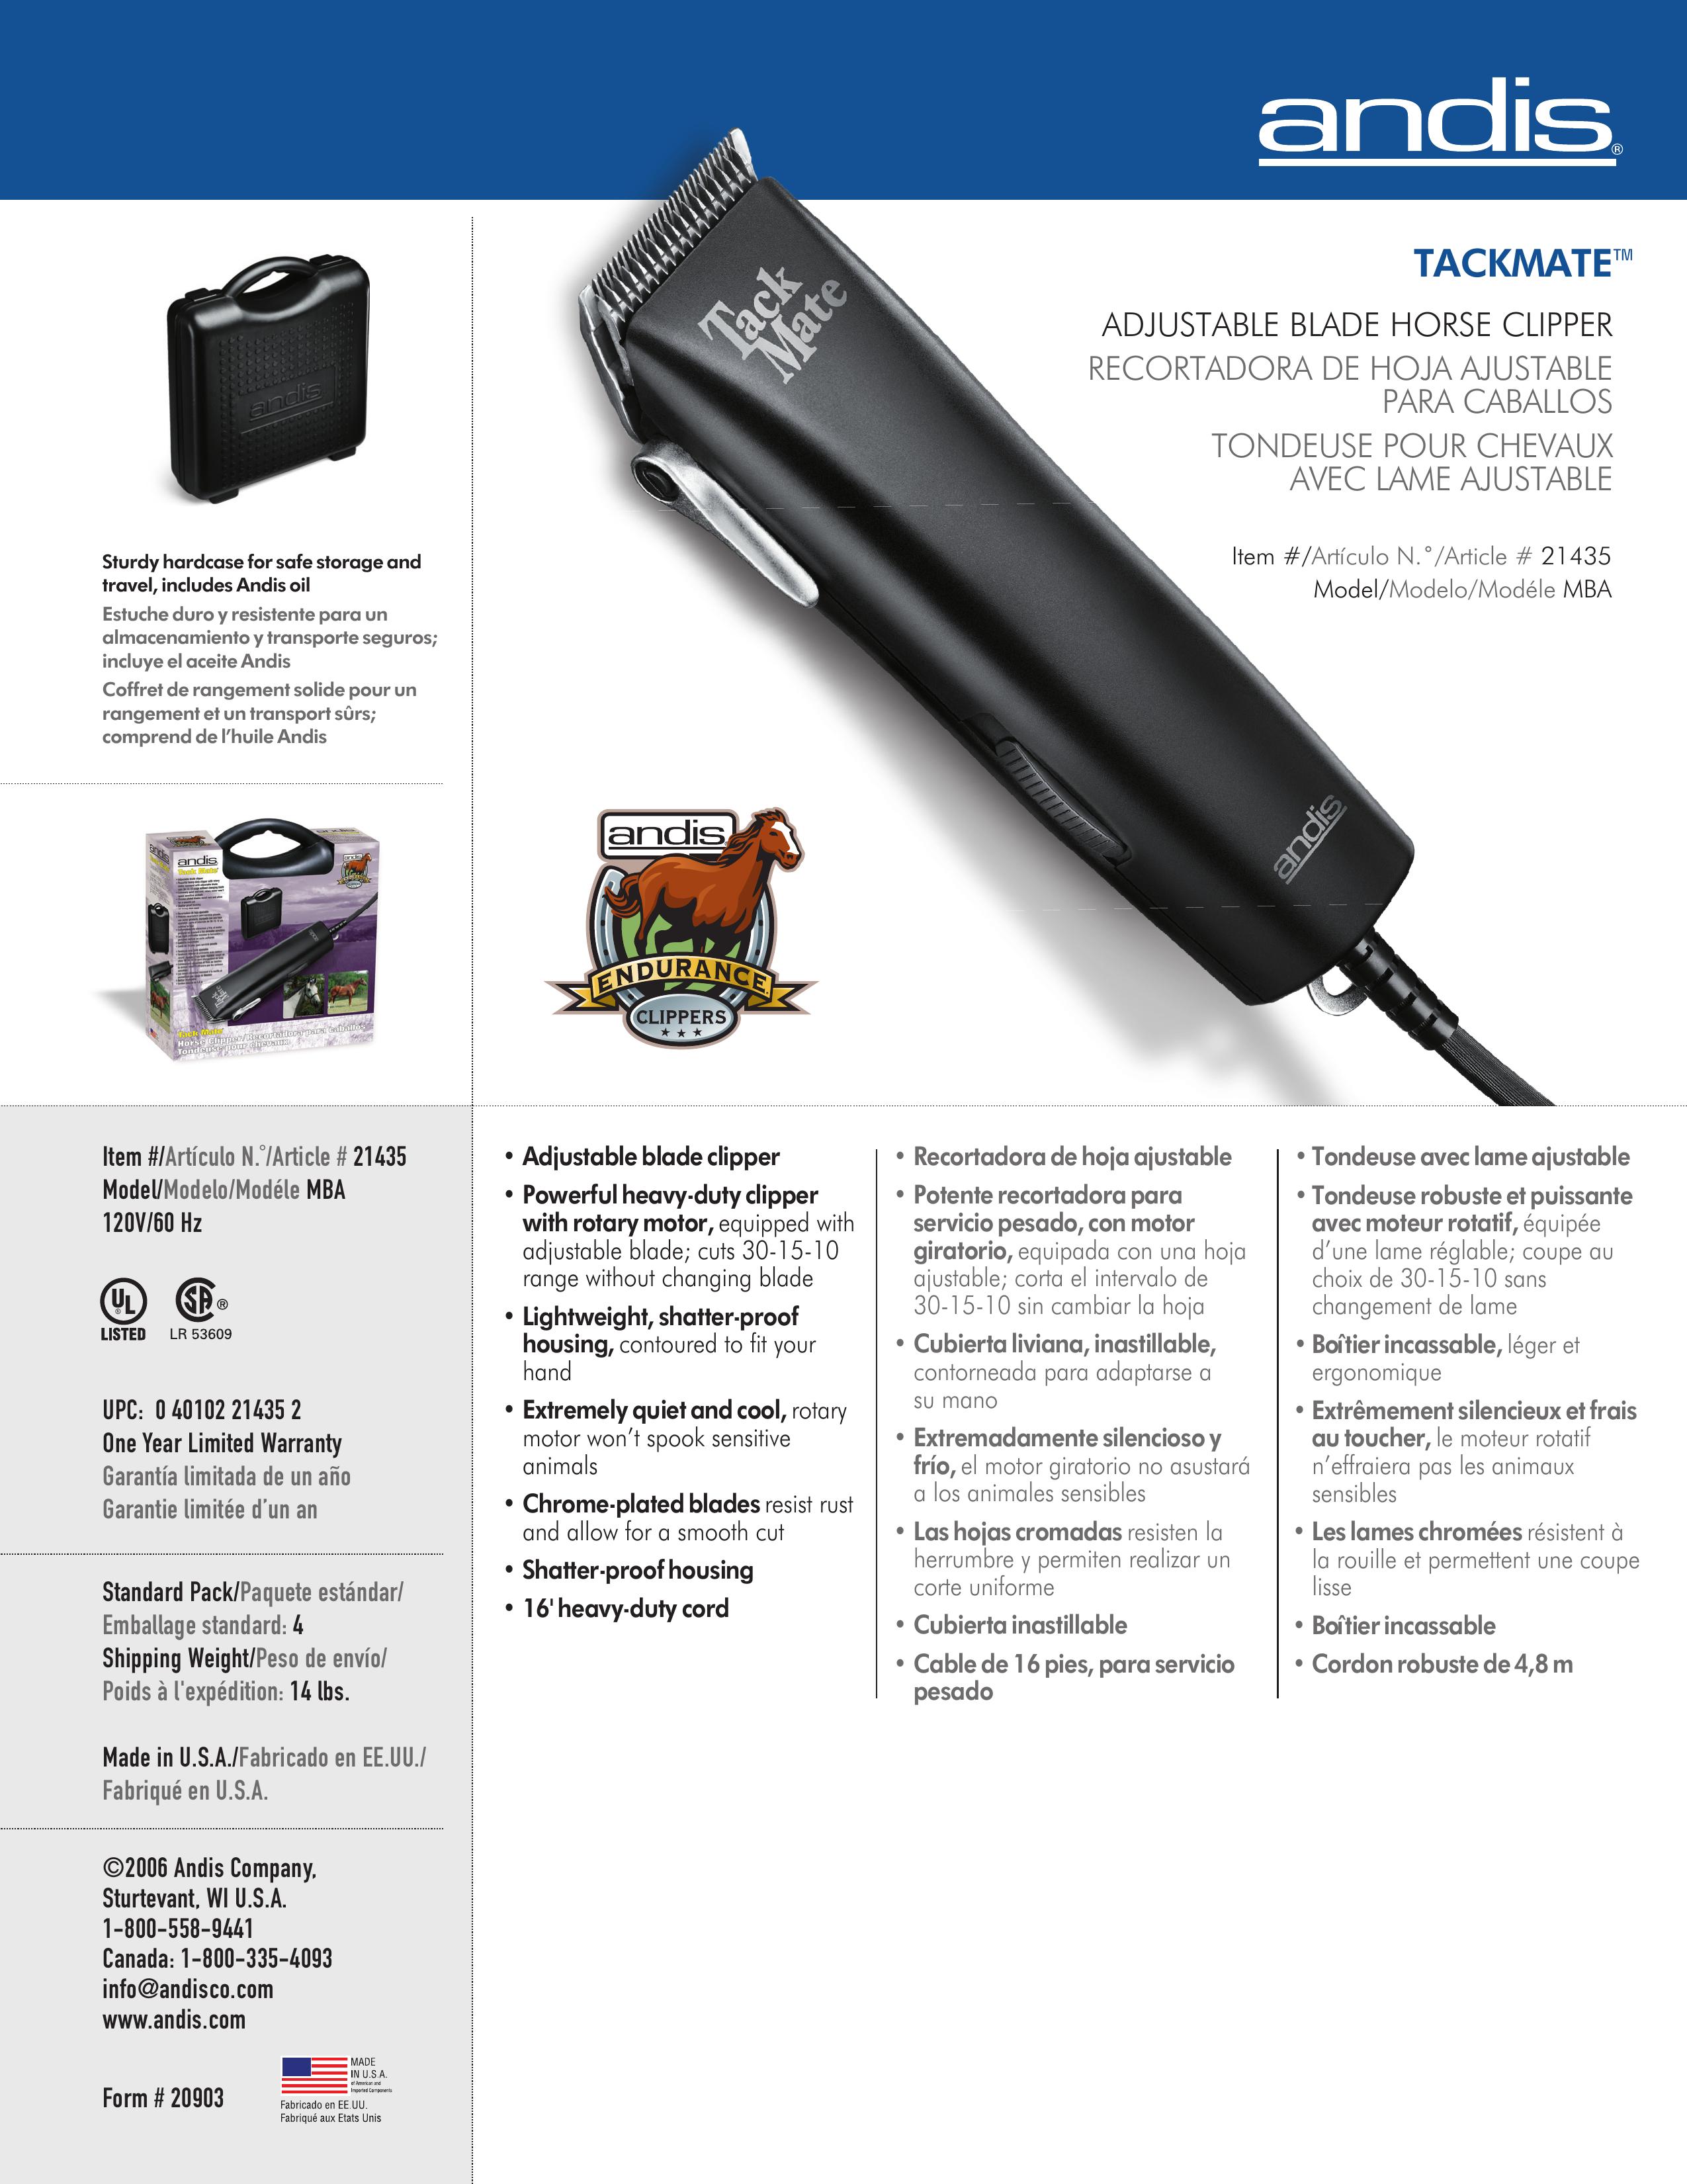 Andis Company MBA 120V/60 Hz Hair Clippers User Manual